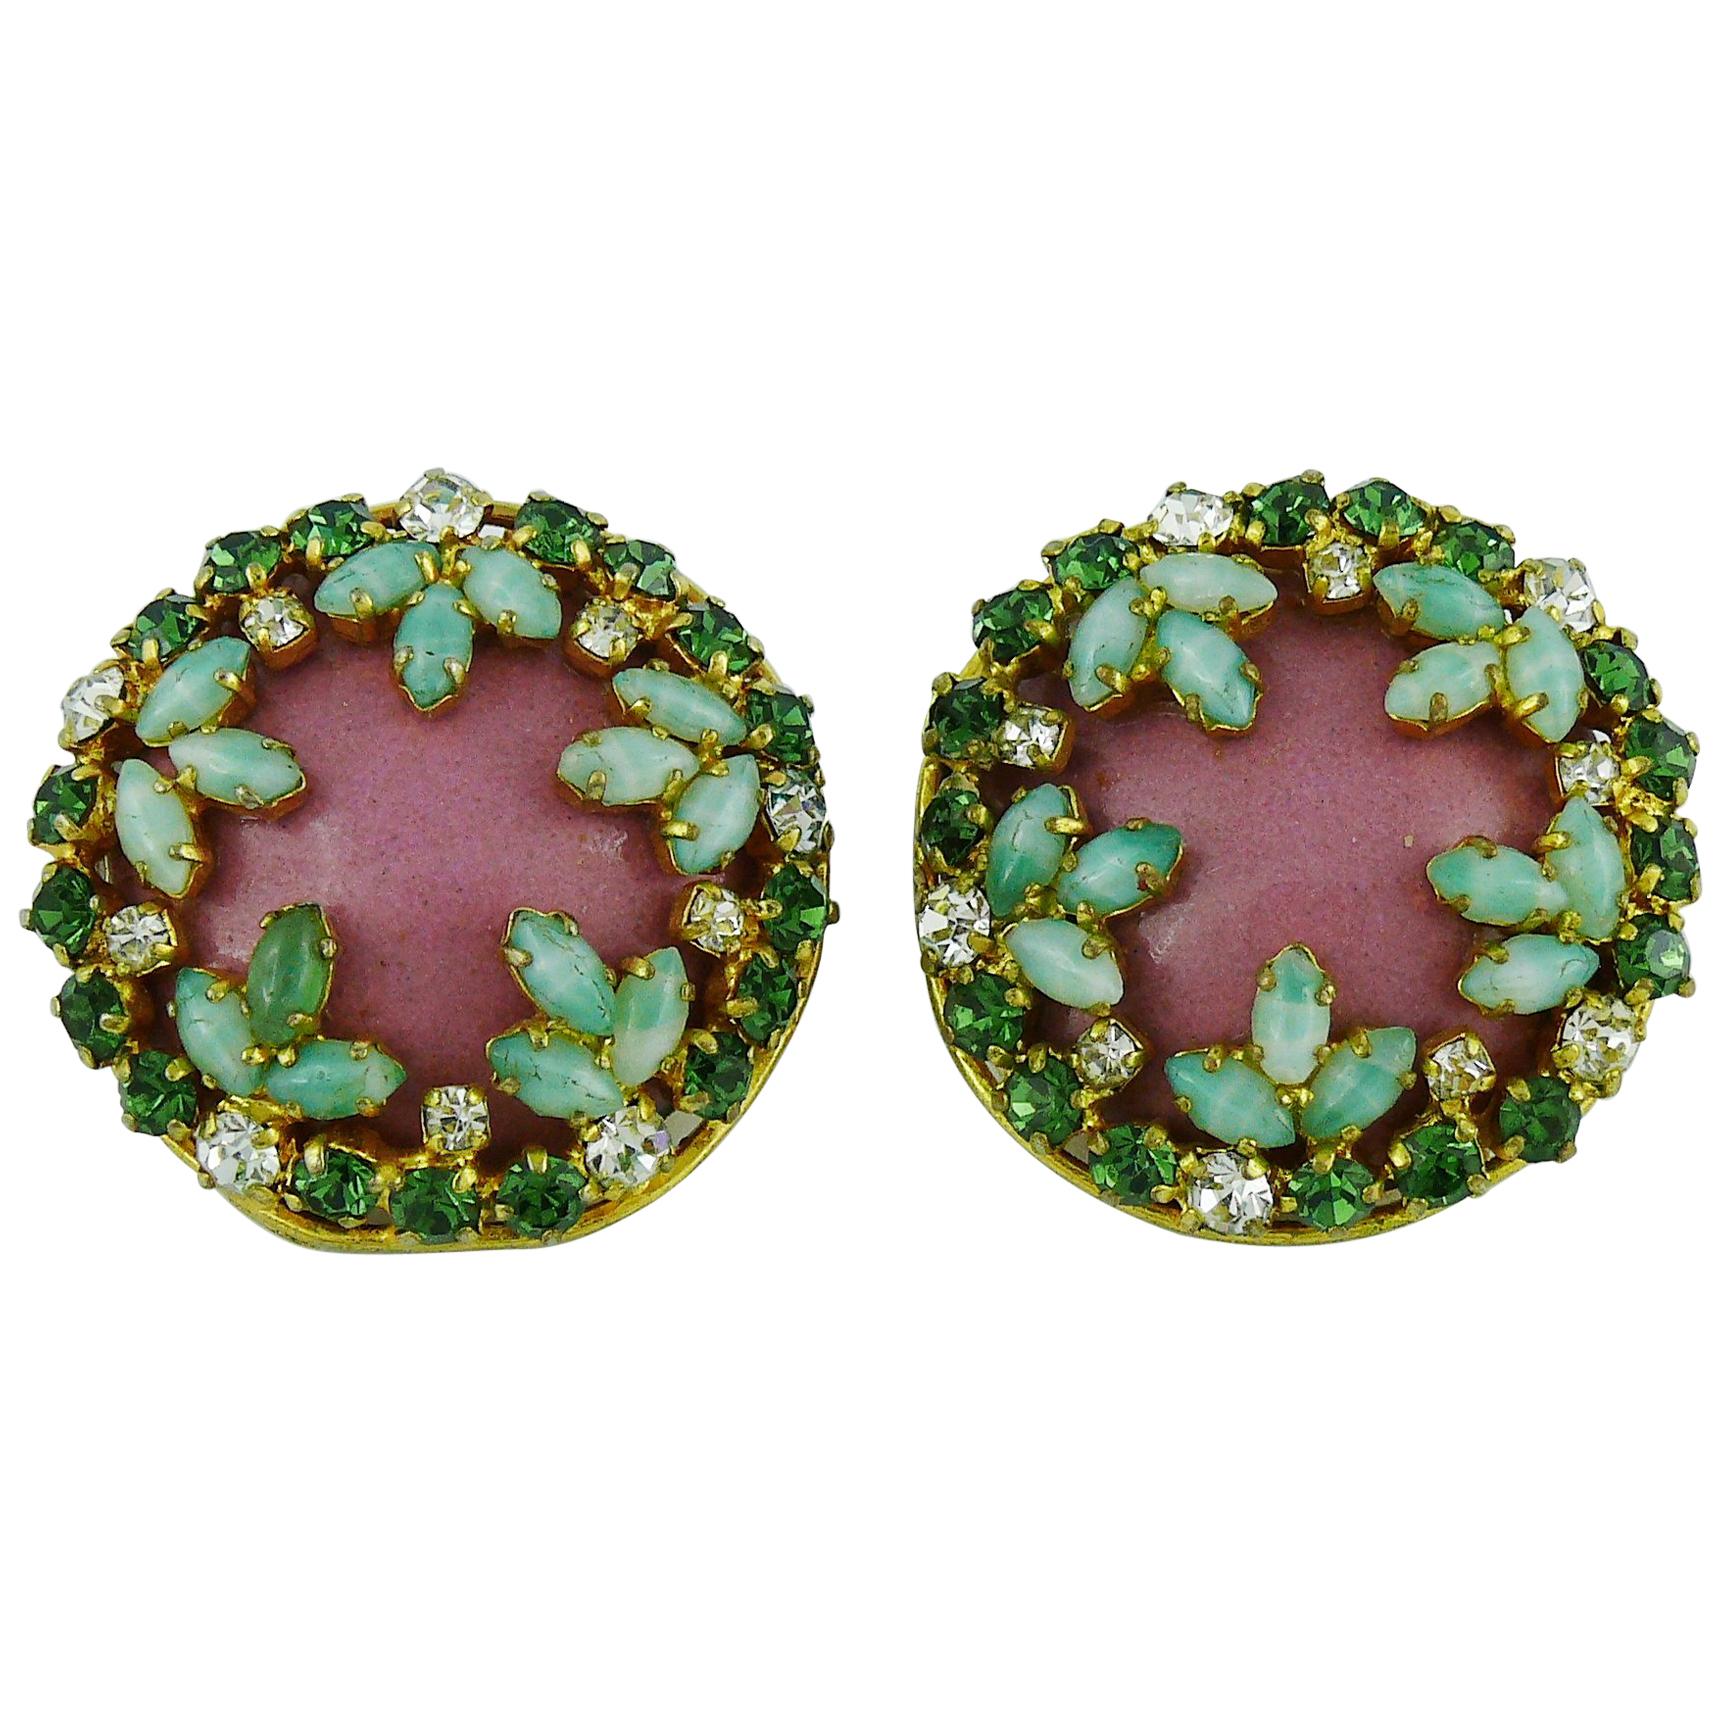 Christian Dior Vintage Jewelled Clip-On Earrings 1960s